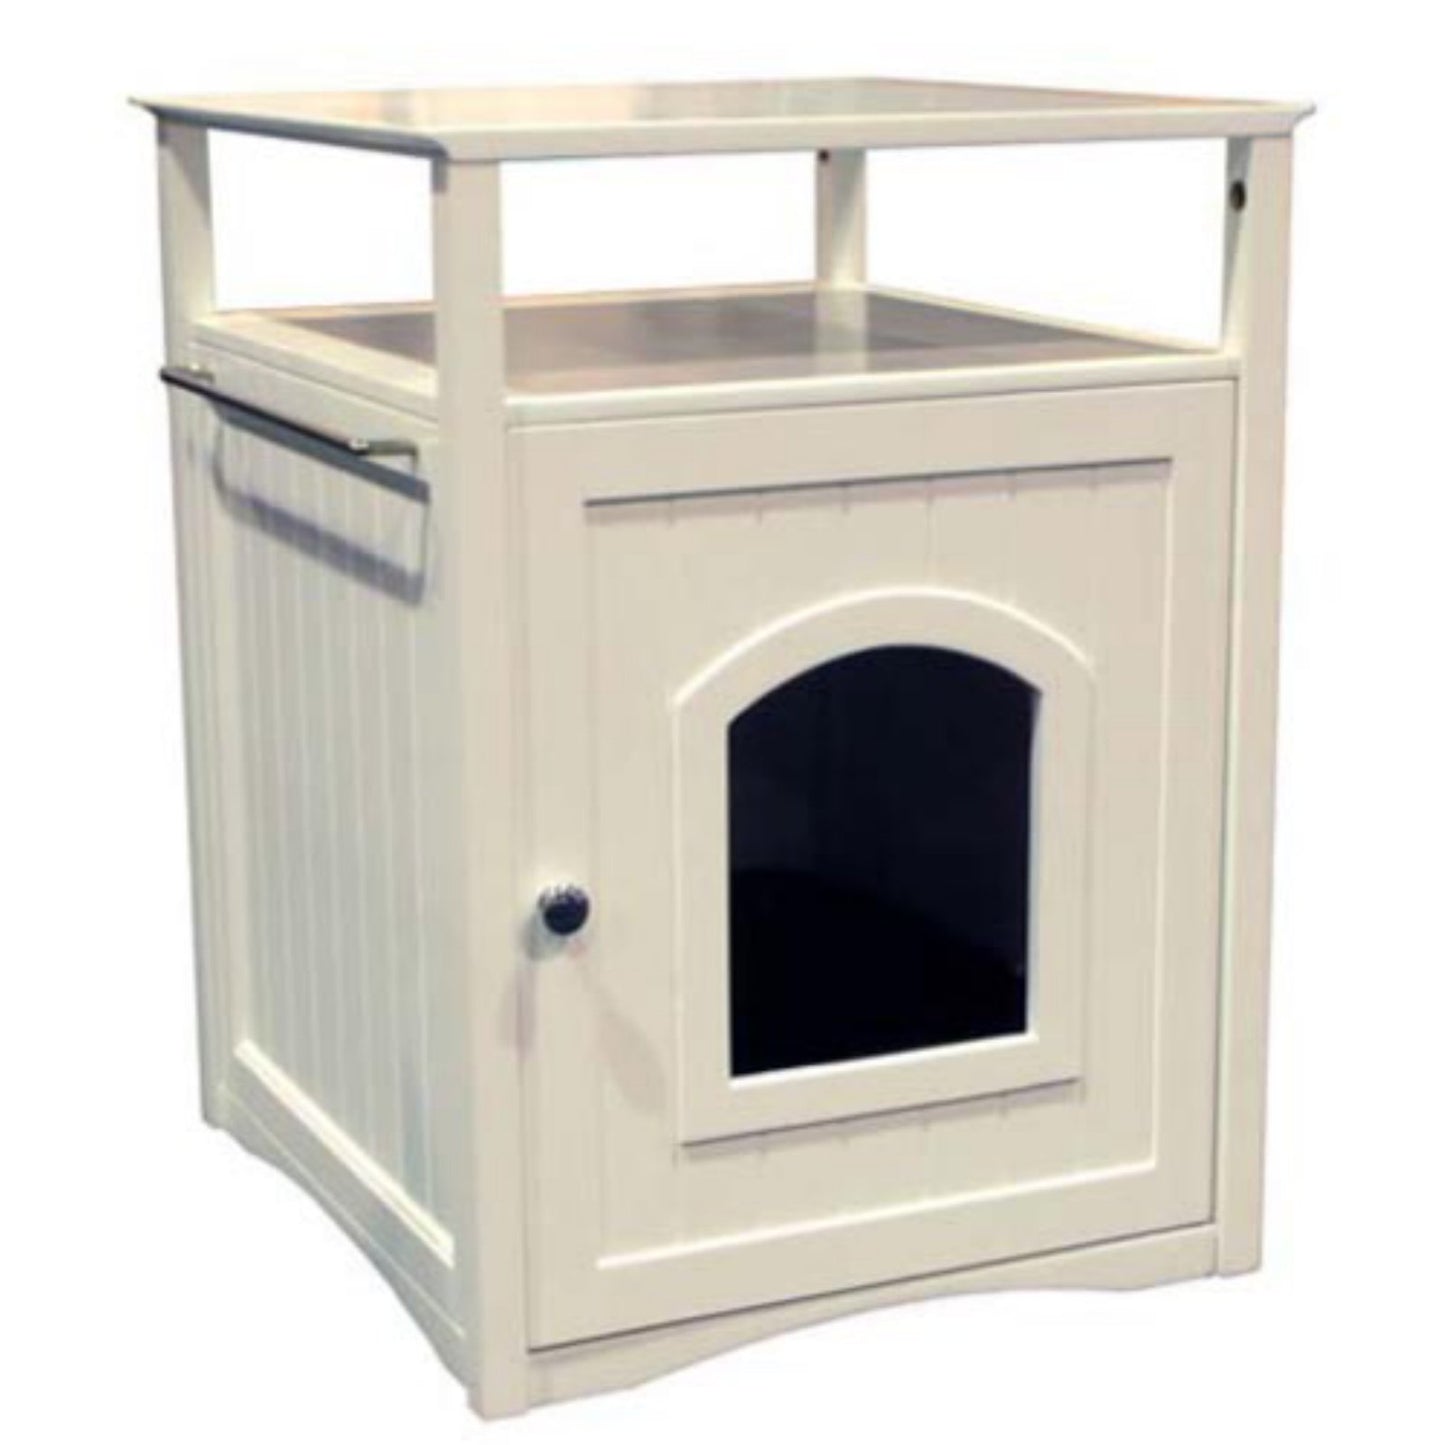 Merry Products Cat Washroom Litter Box Cover, Night Stand Pet House, White